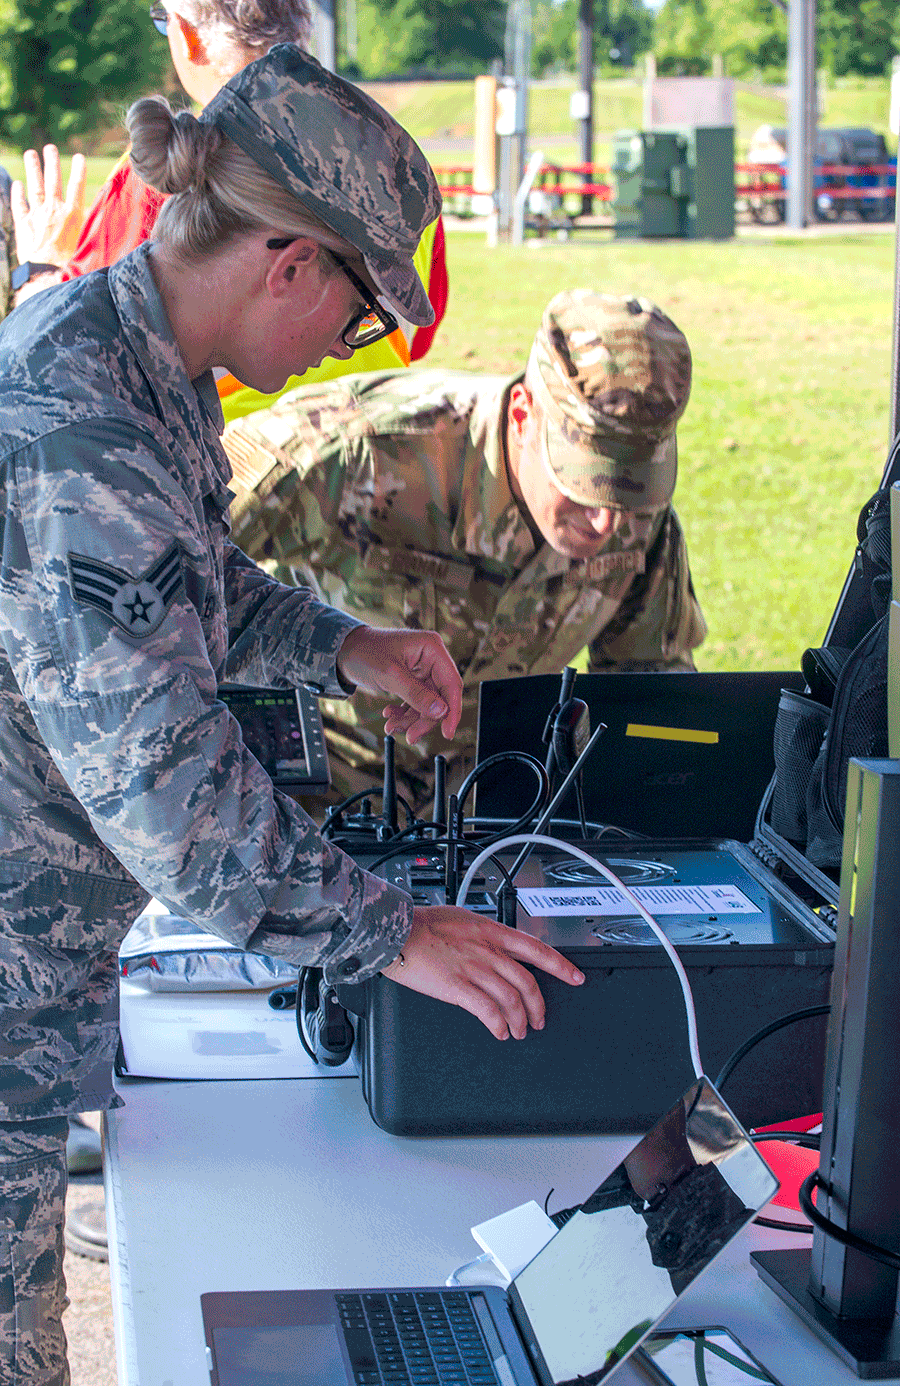 Female Airman sets up communication equipmenton table under tent in field.